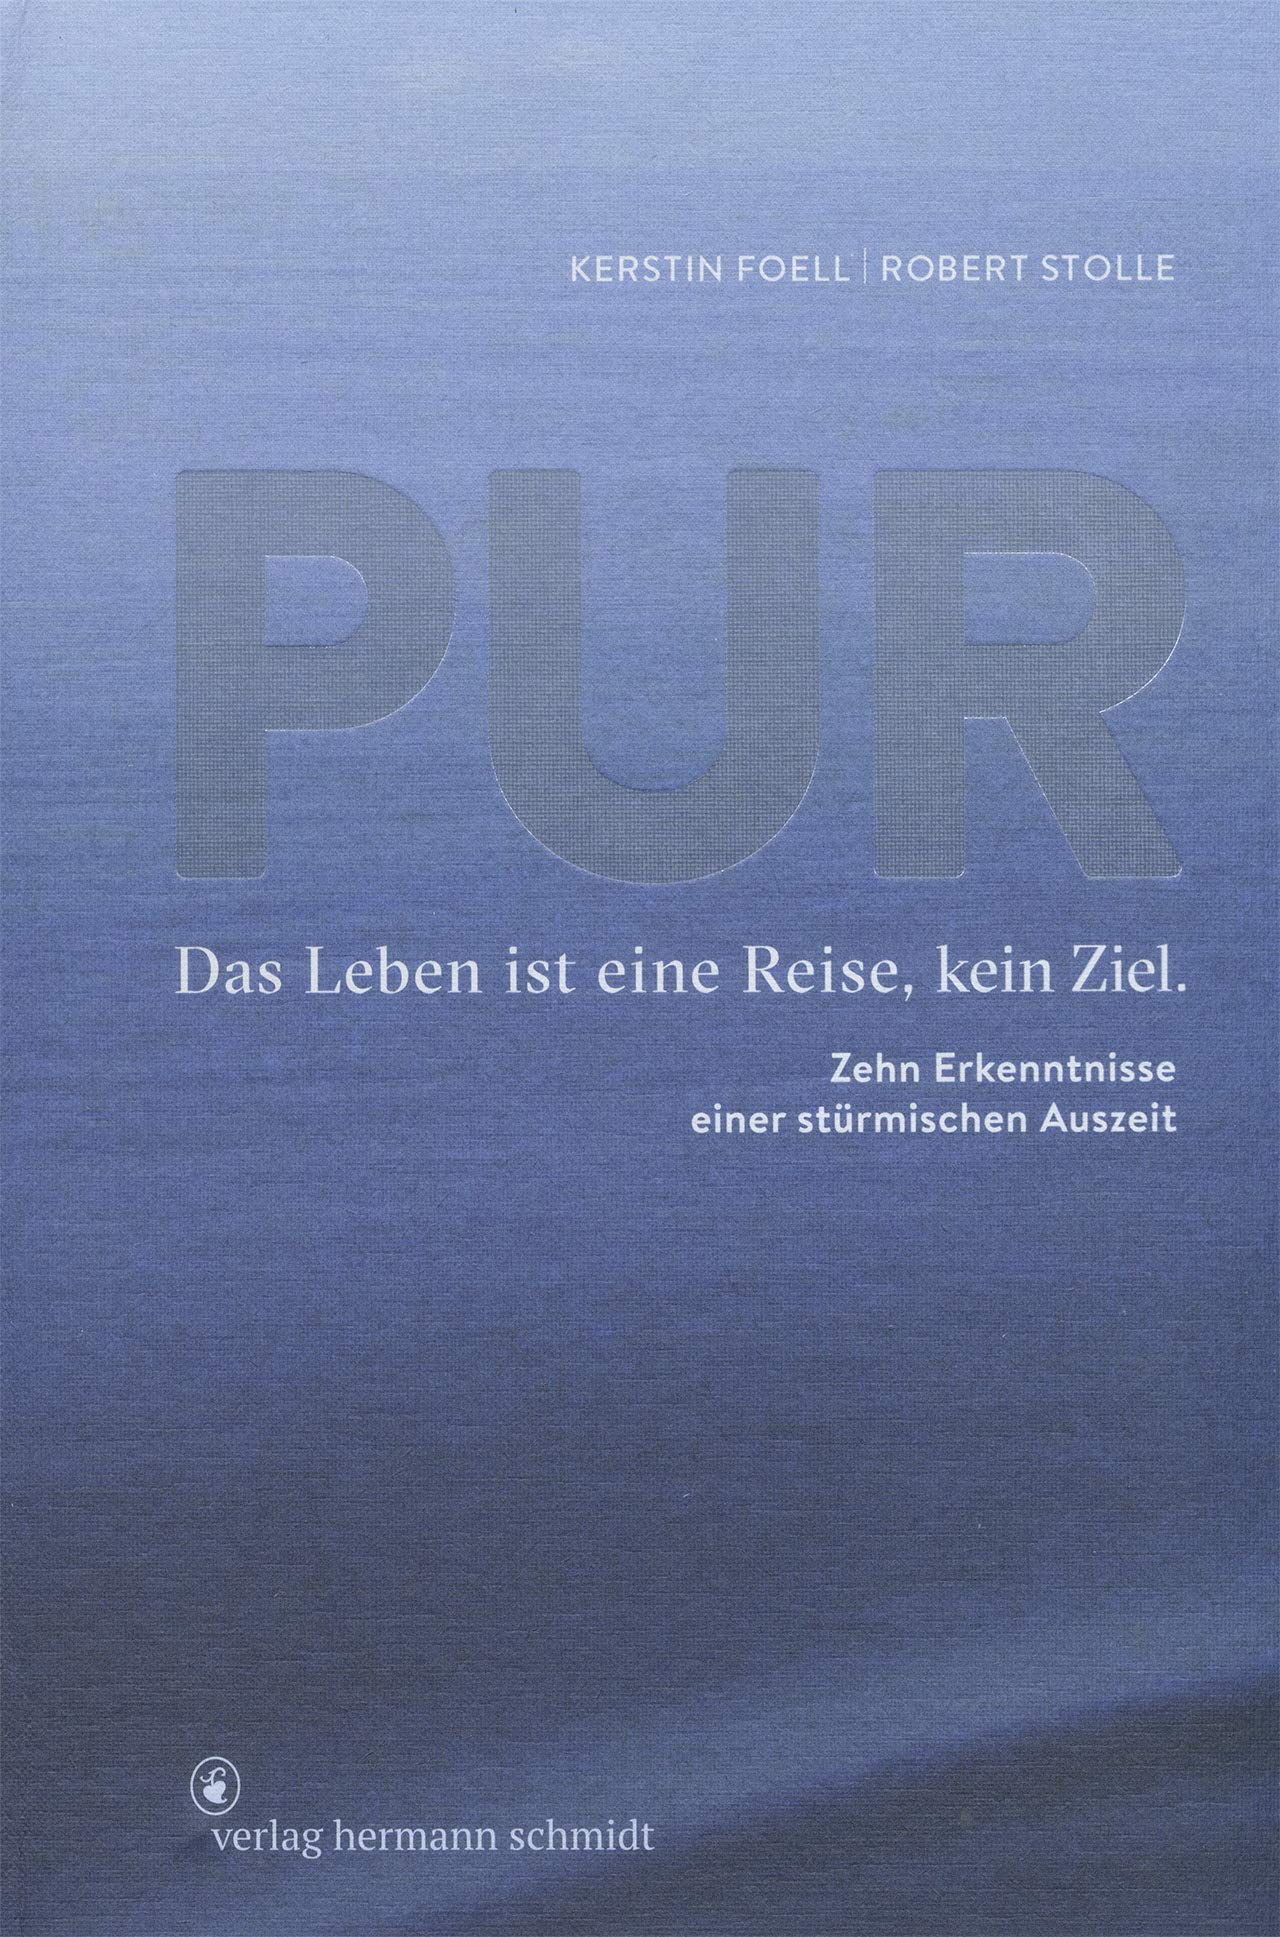 PUR Kerstin Foell Book Cover